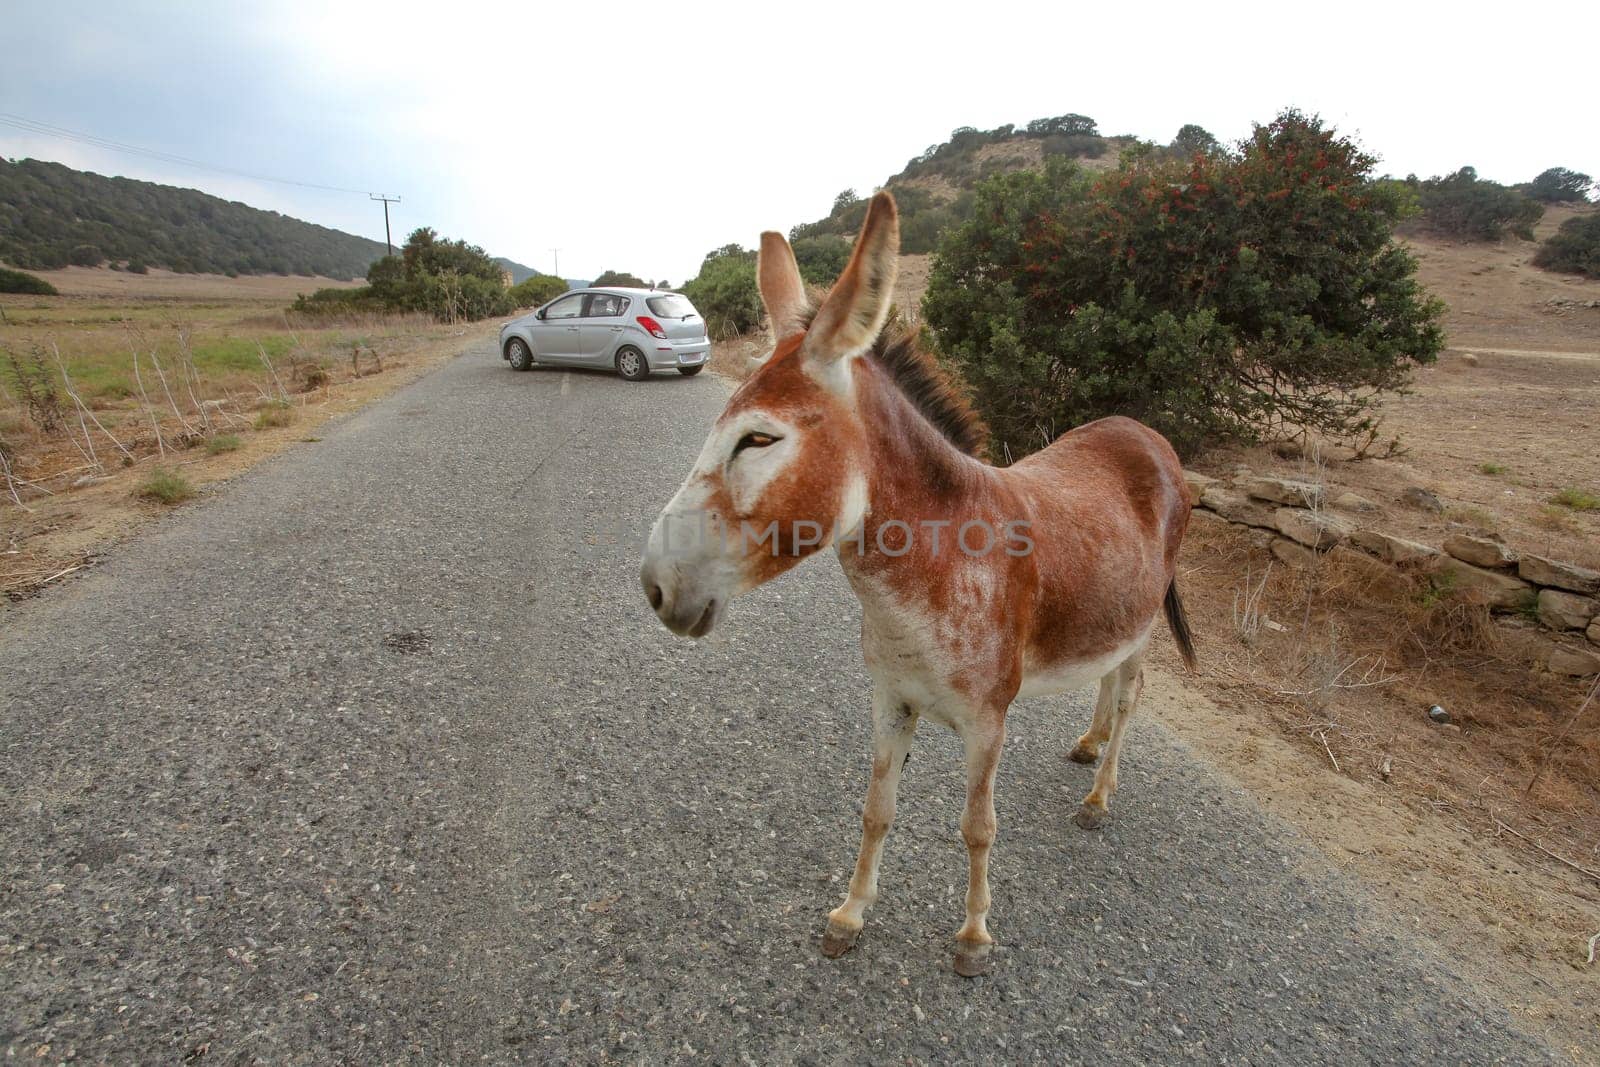 Wild donkey standing on main road, car in distance. These animals roam freely in Karpass region of Northern Cyprus by Ivanko